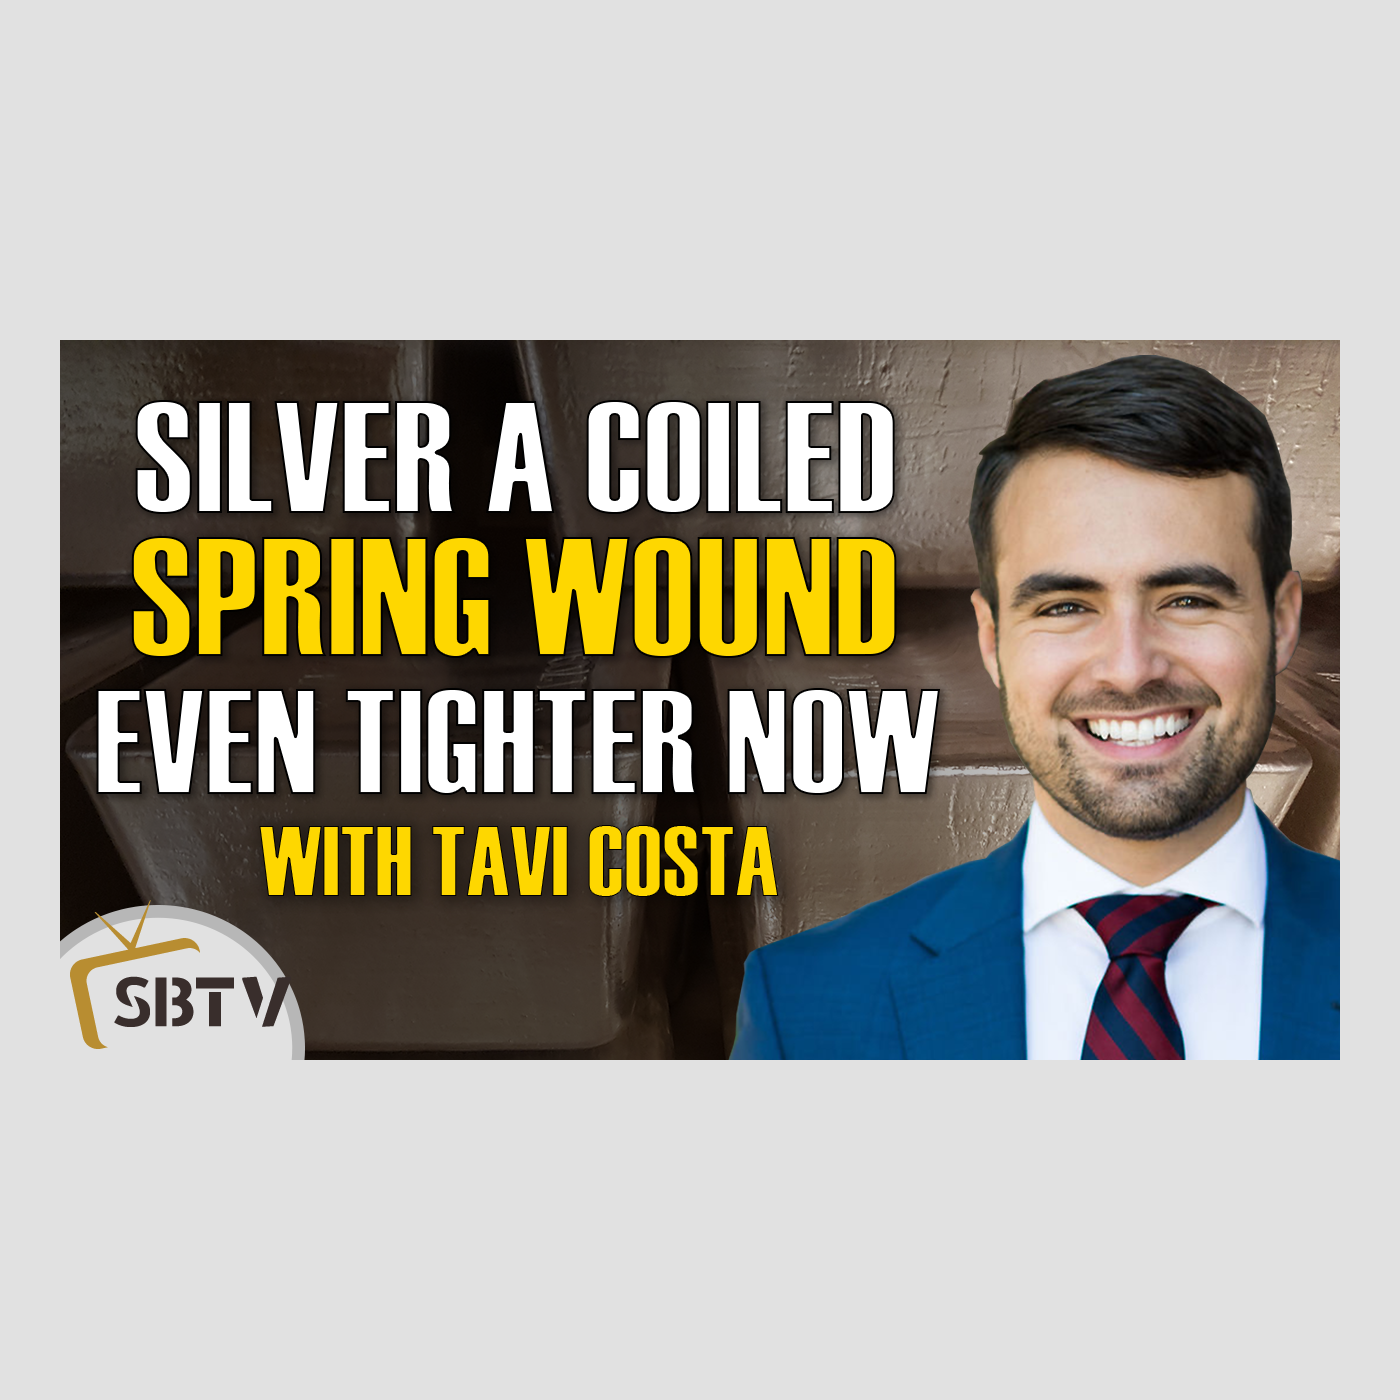 102 Tavi Costa - Silver Is A Coiled Spring Wound Even Tighter Now